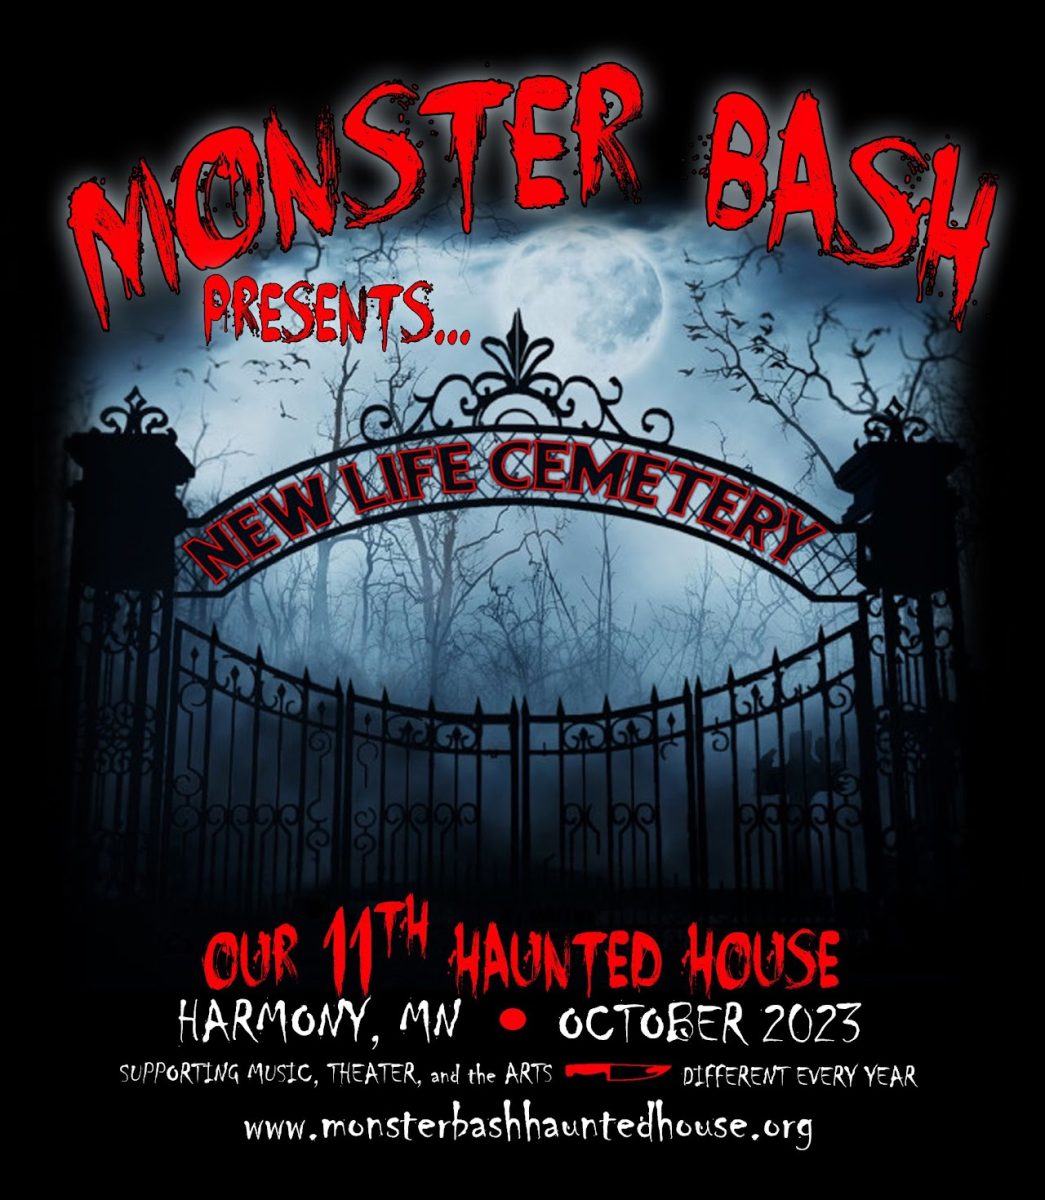 Monster Bash Haunted House OPENING SOON!